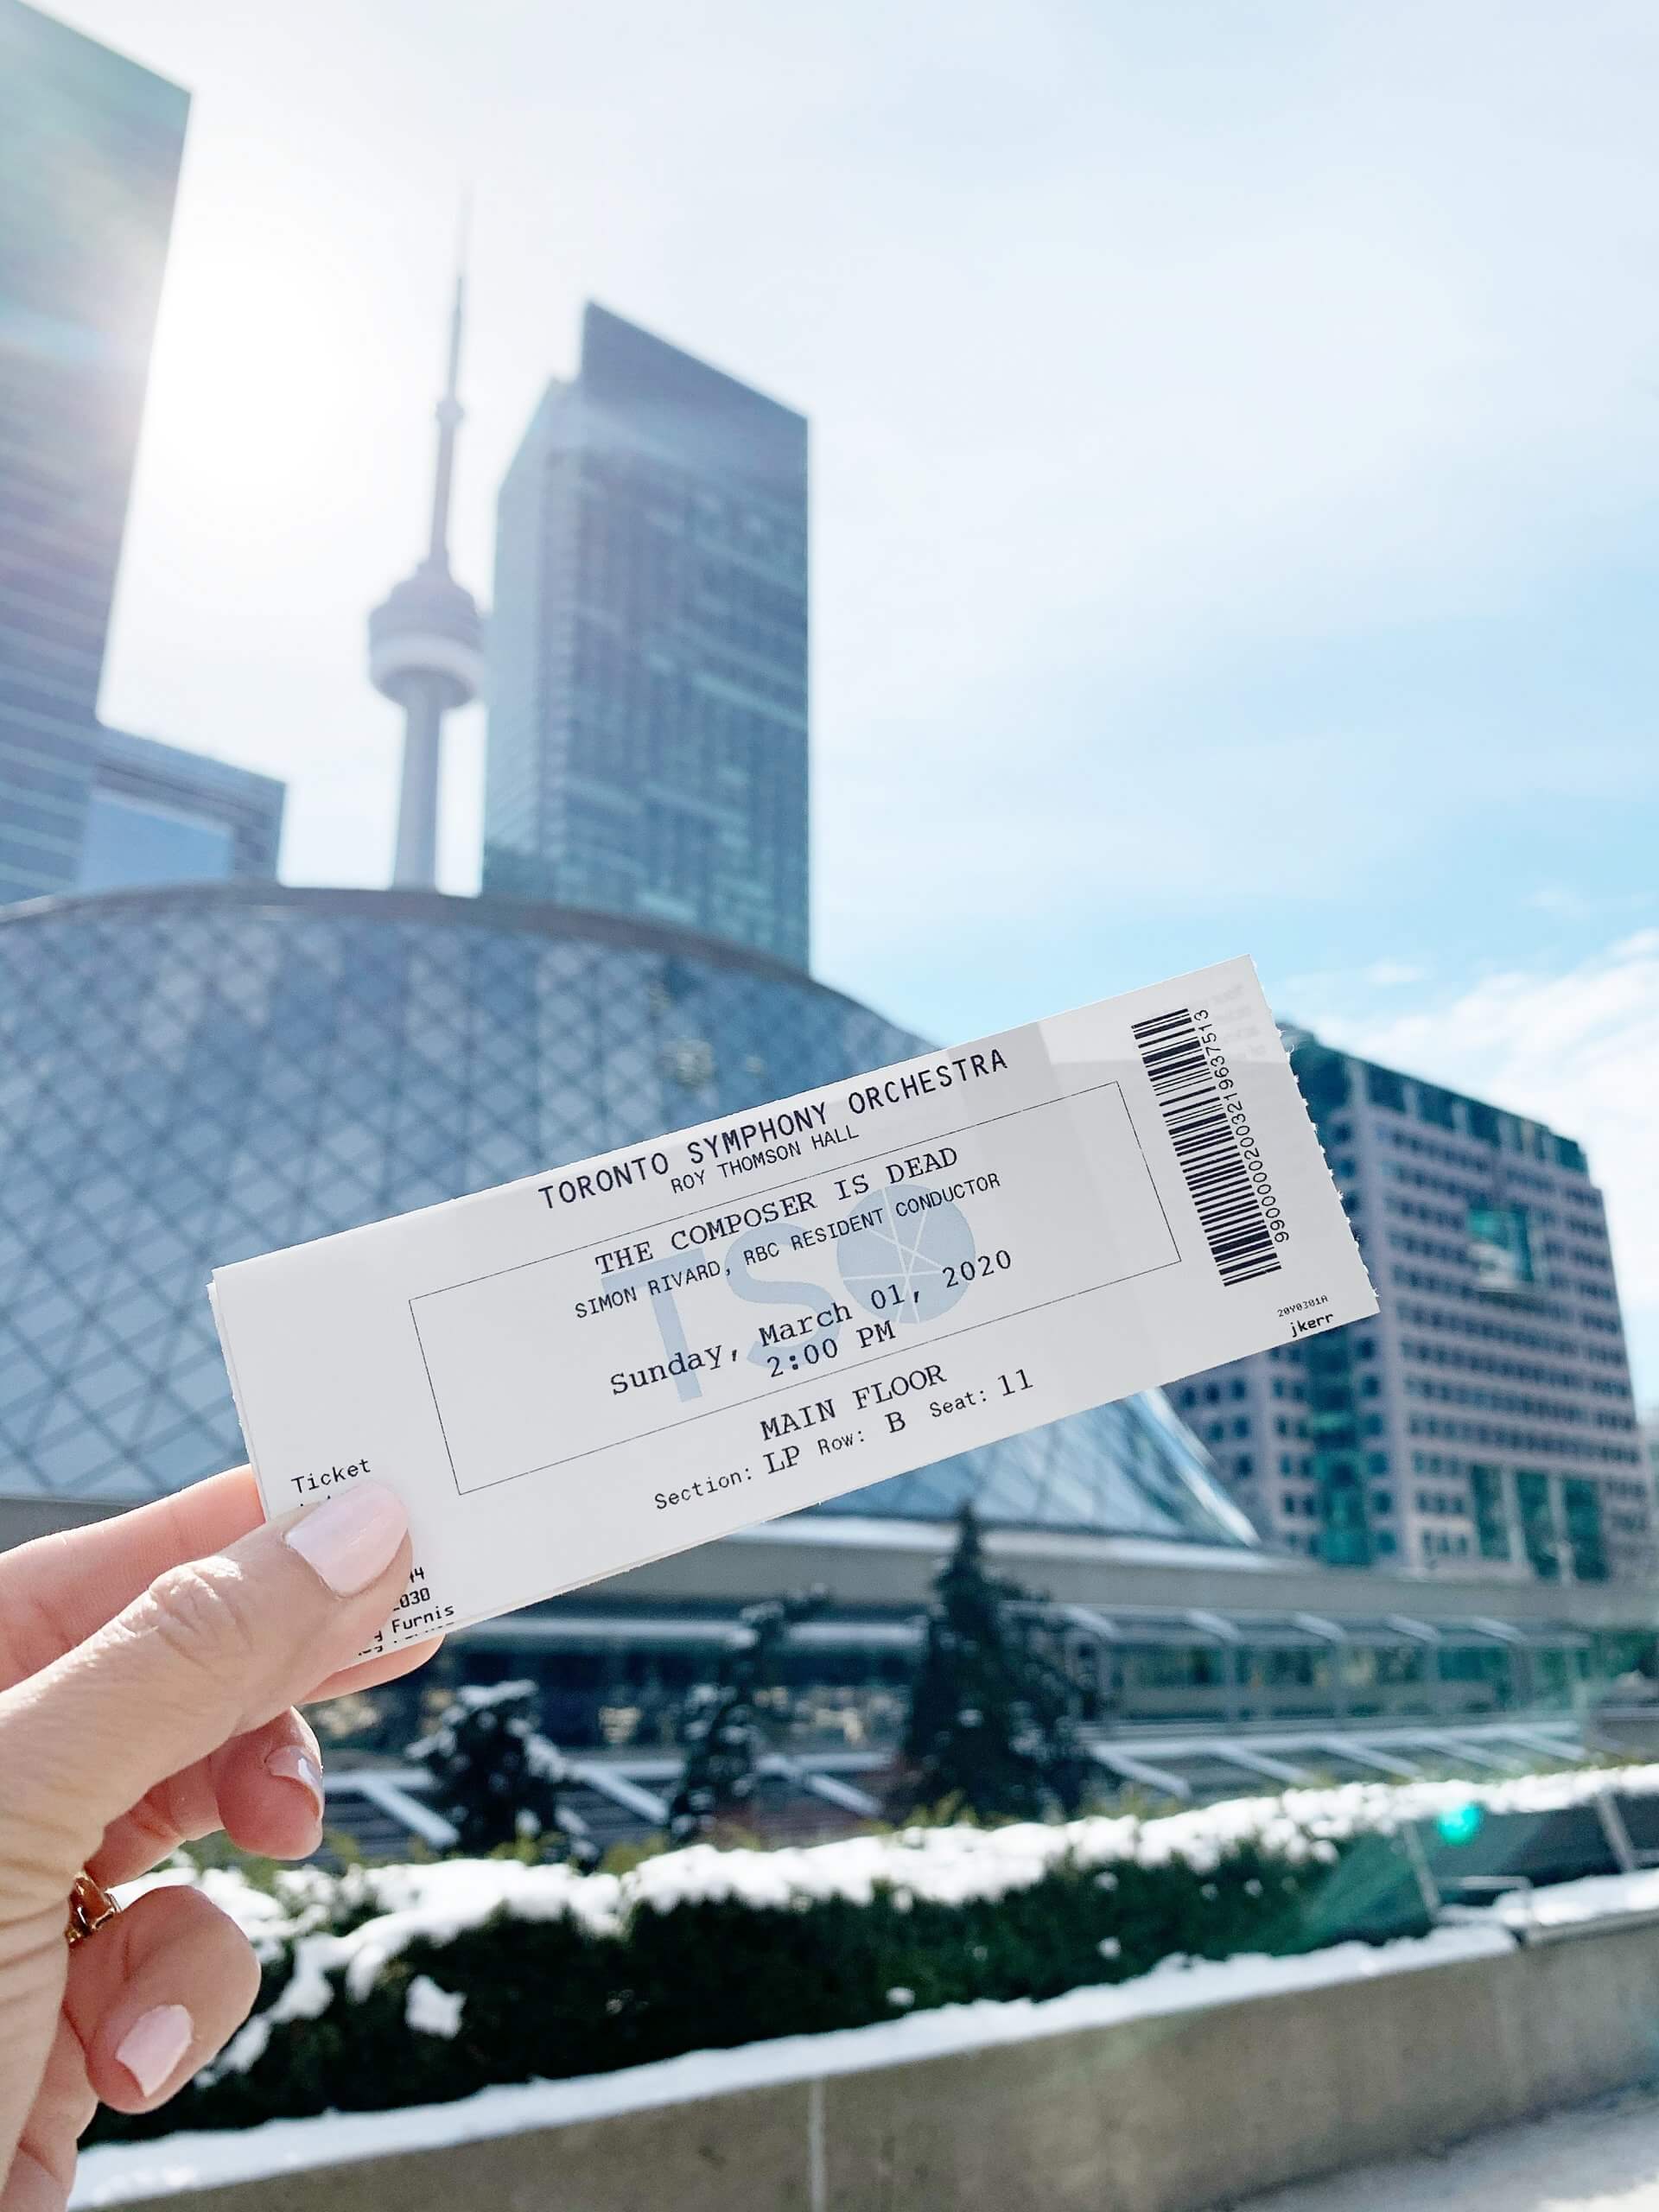 Our Experience at the Toronto Symphony Orchestra's Young People's Concert